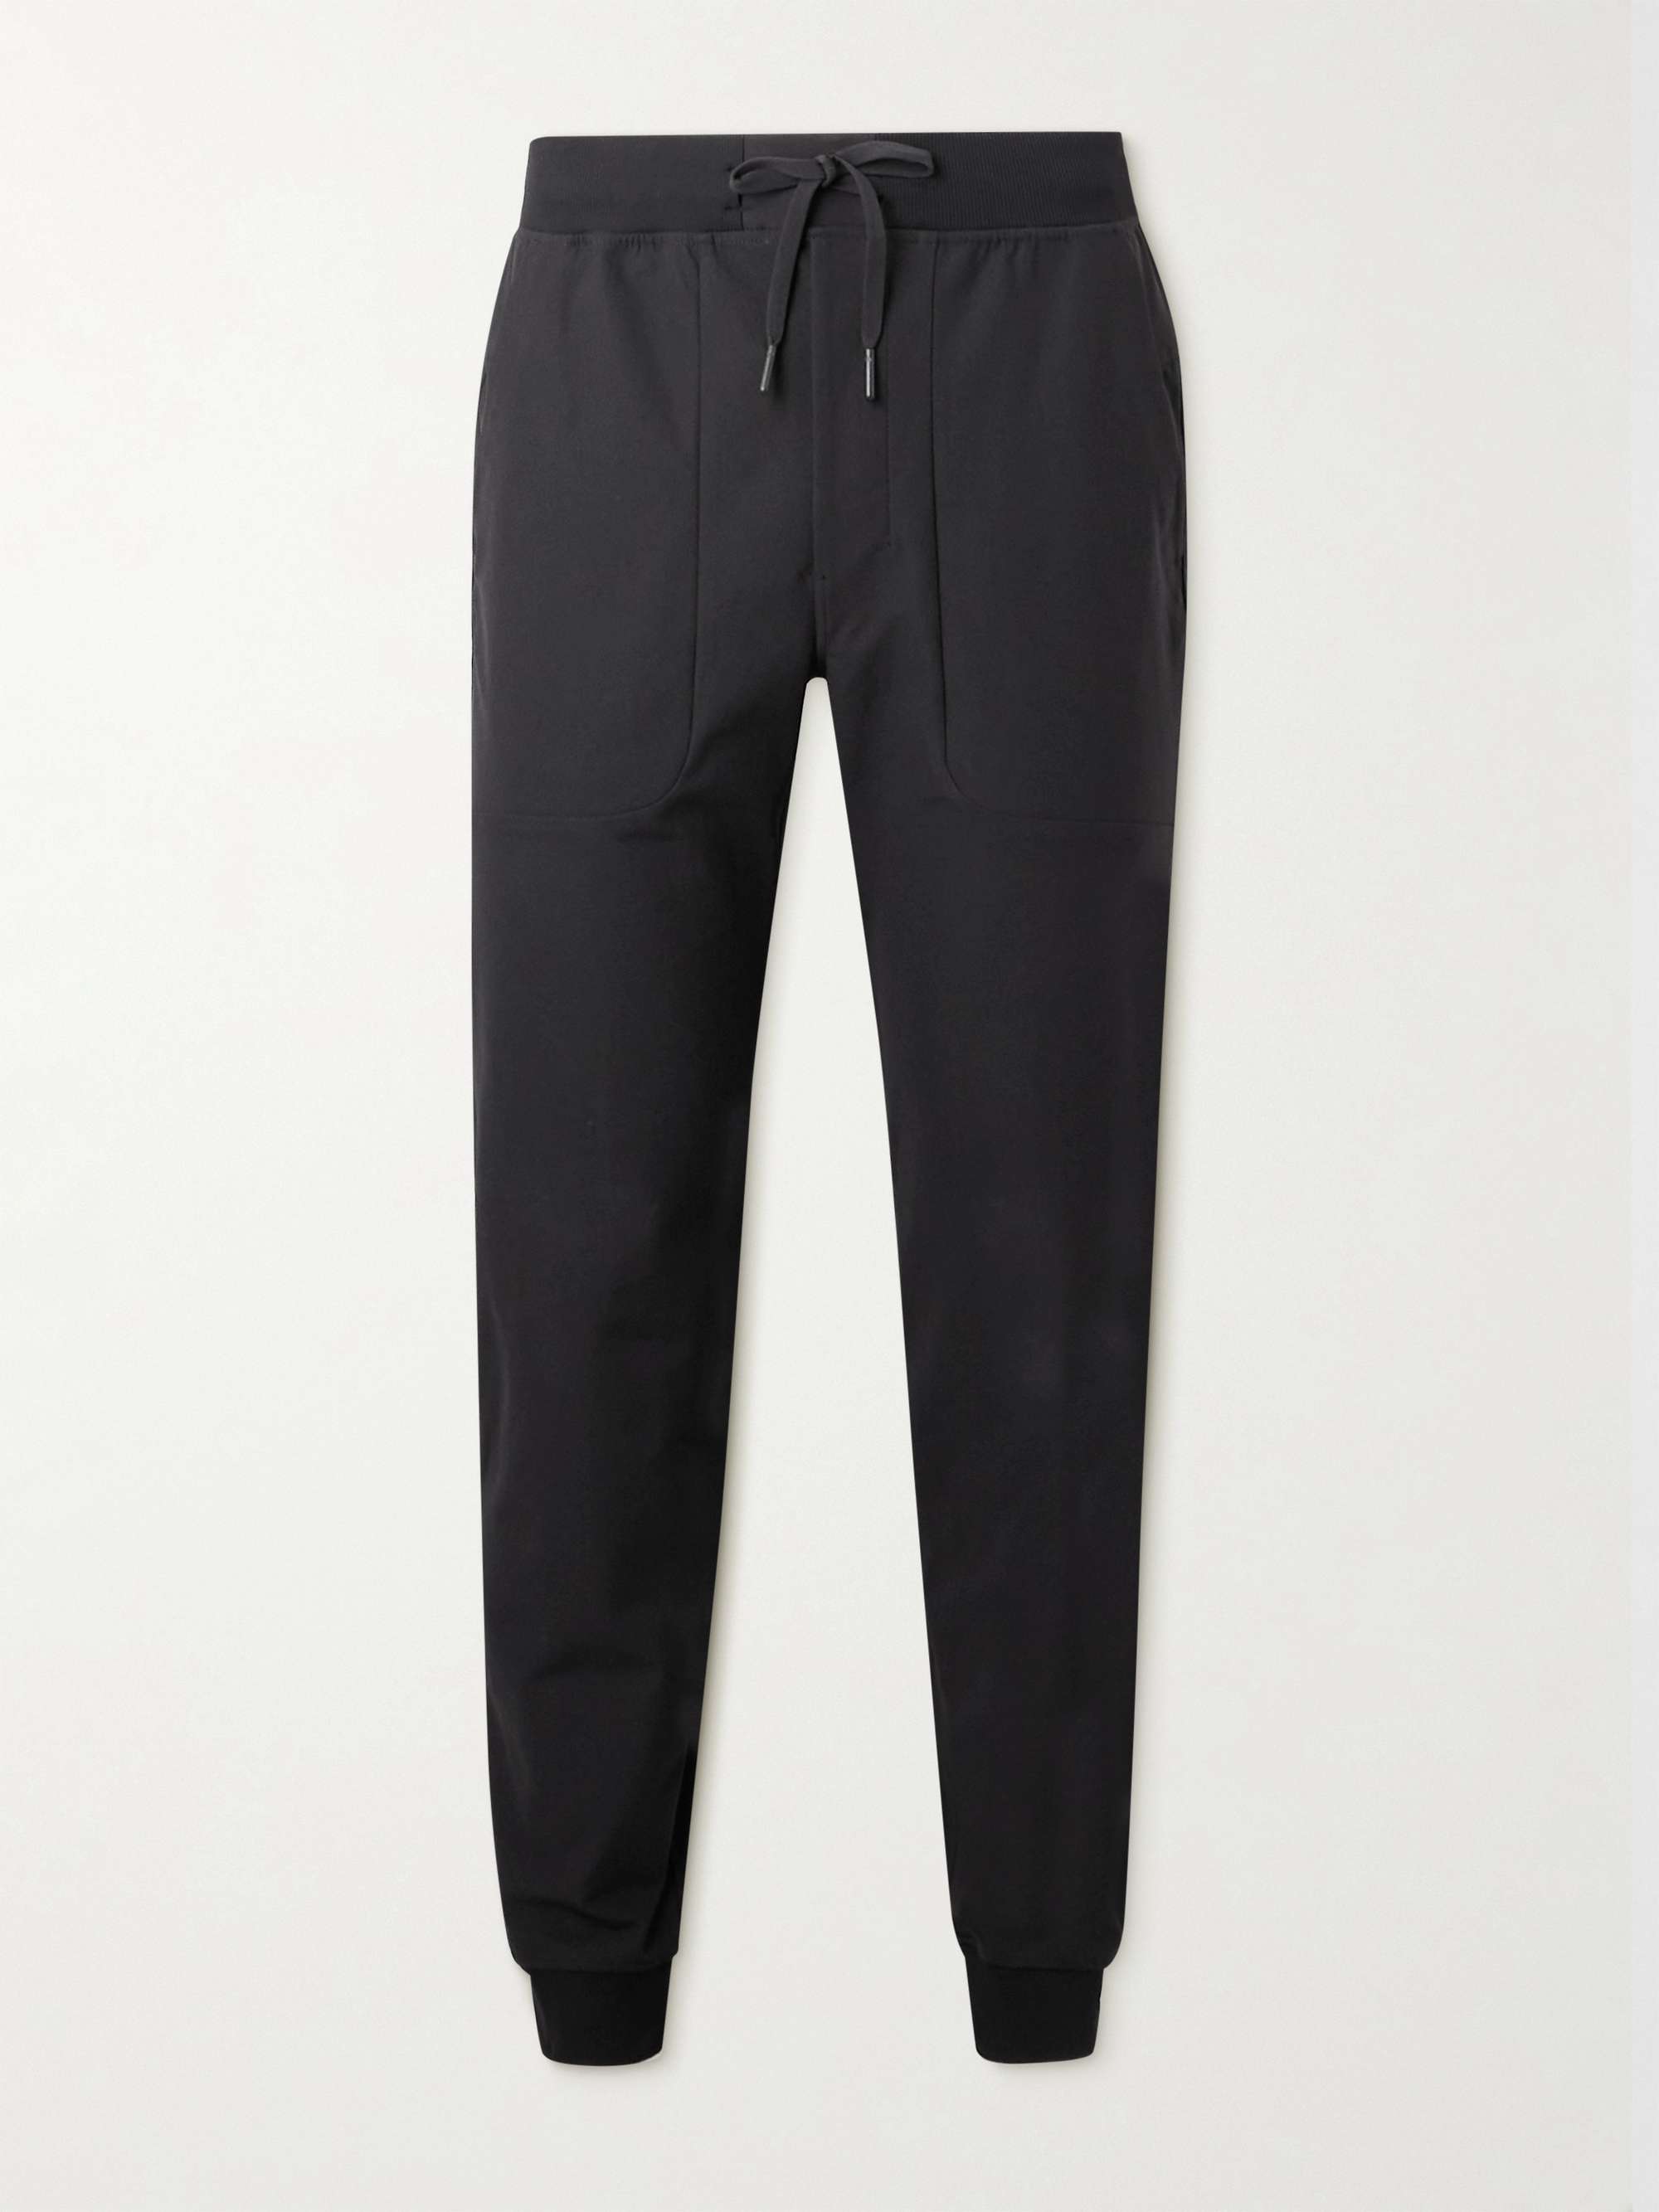 LULULEMON ABC Slim-Fit Tapered Recycled-Warpstreme™ Drawstring Trousers for  Men